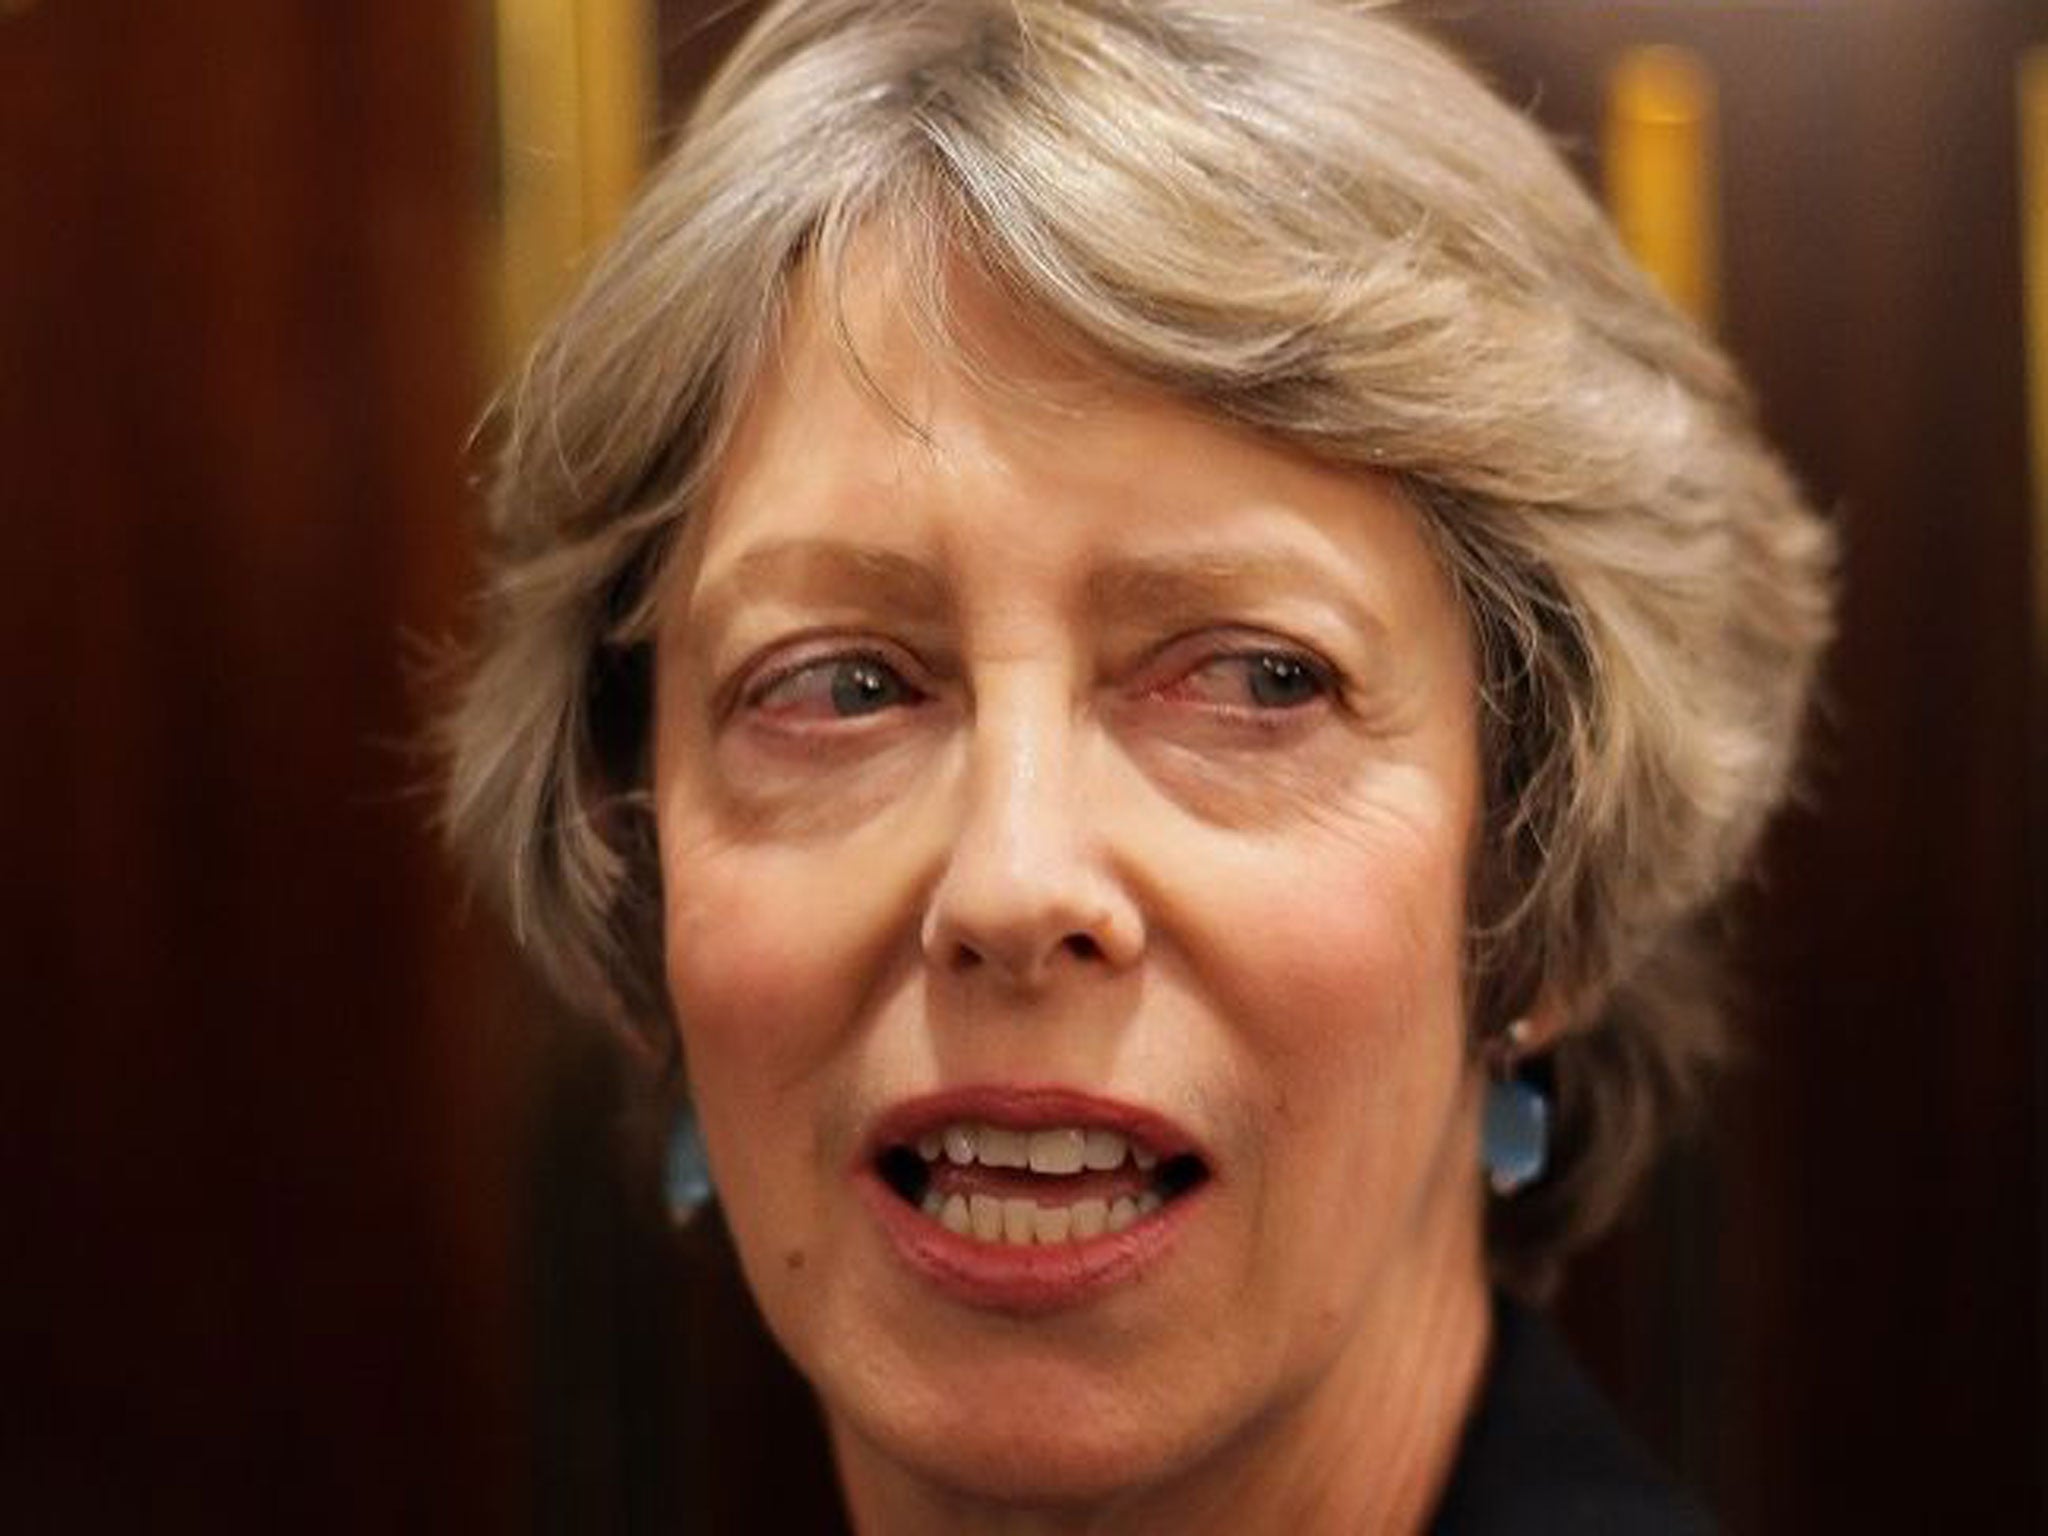 Patricia Hewitt, the former Health Secretary says the UK model is revered in India